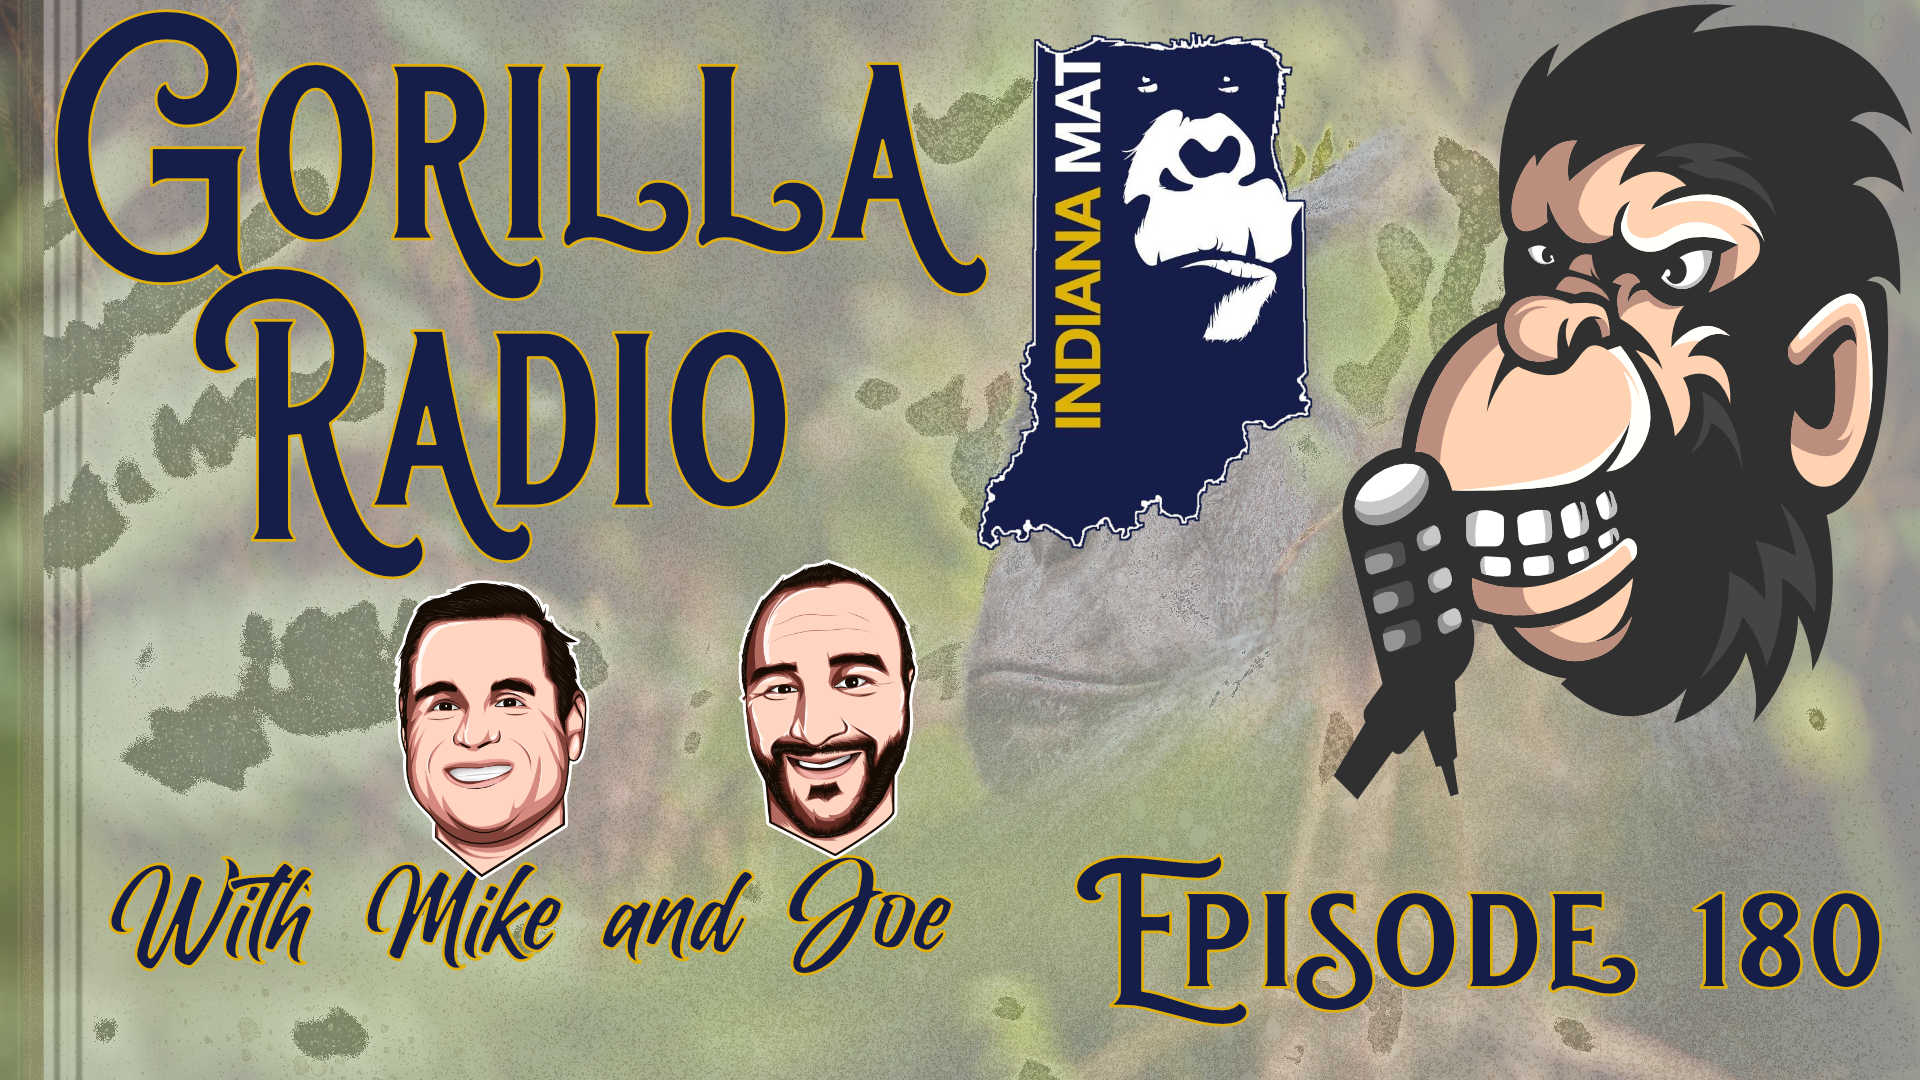 More information about "IndianaMat Gorilla Radio Episode 180- Hall of Fame and MORE!"